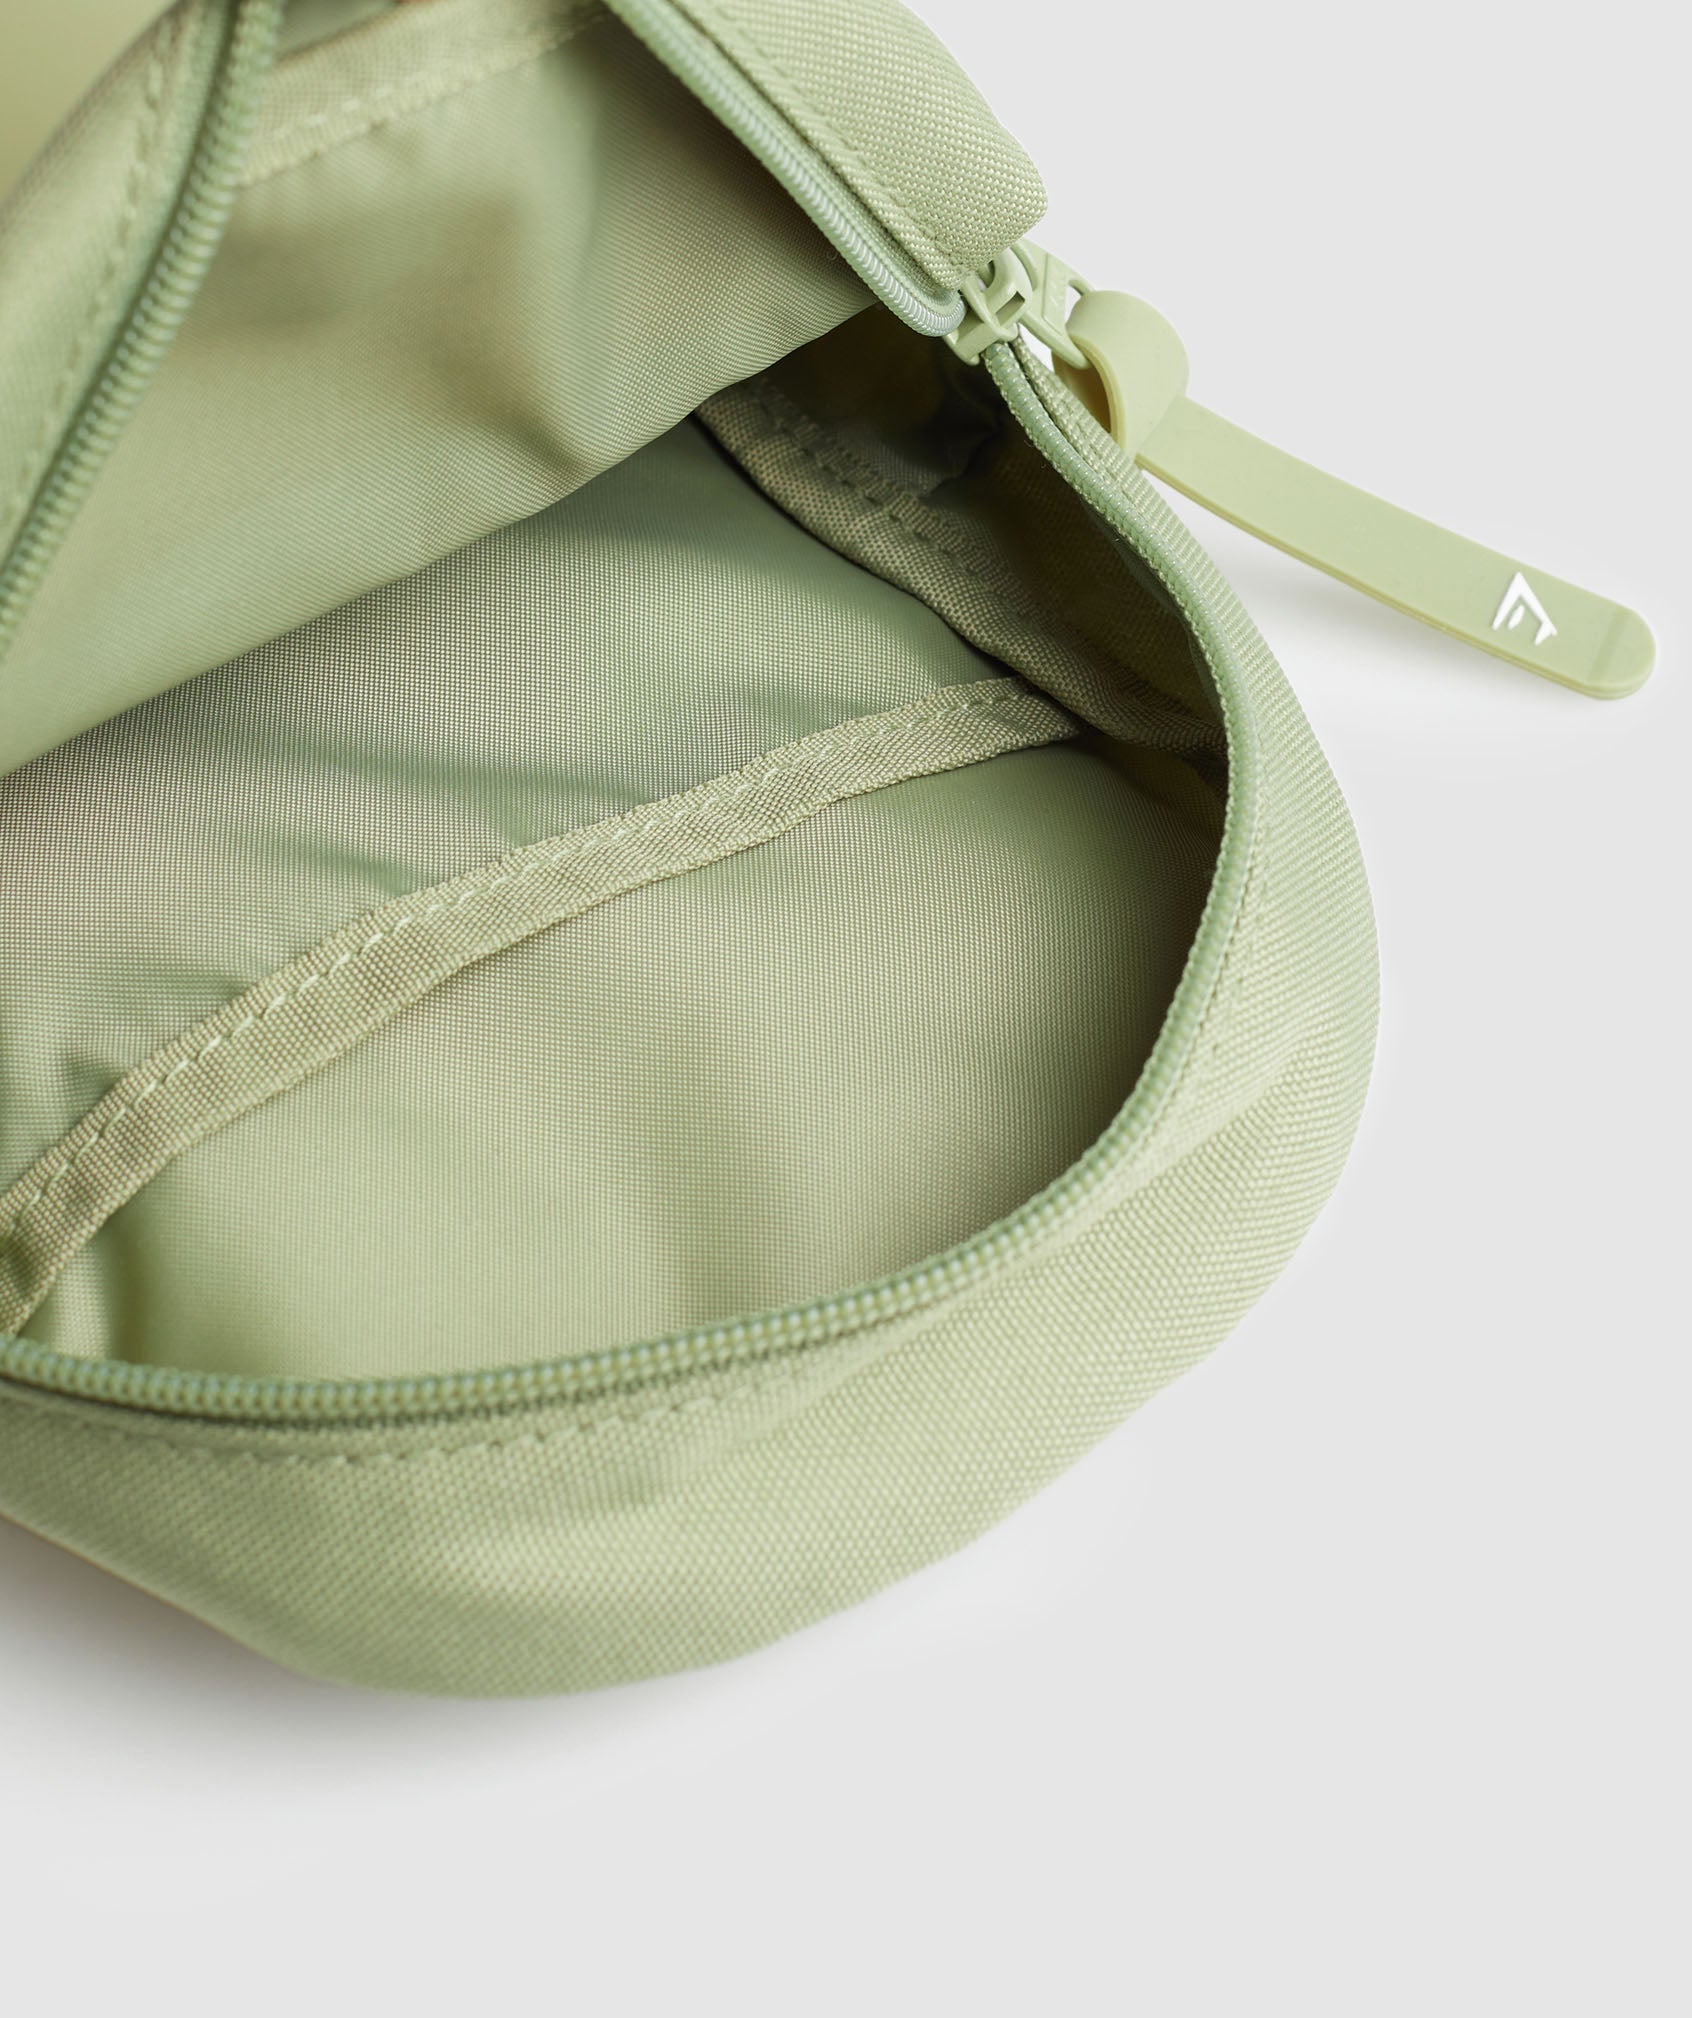 Everyday Crossbody Bag in Natural Sage Green - view 3